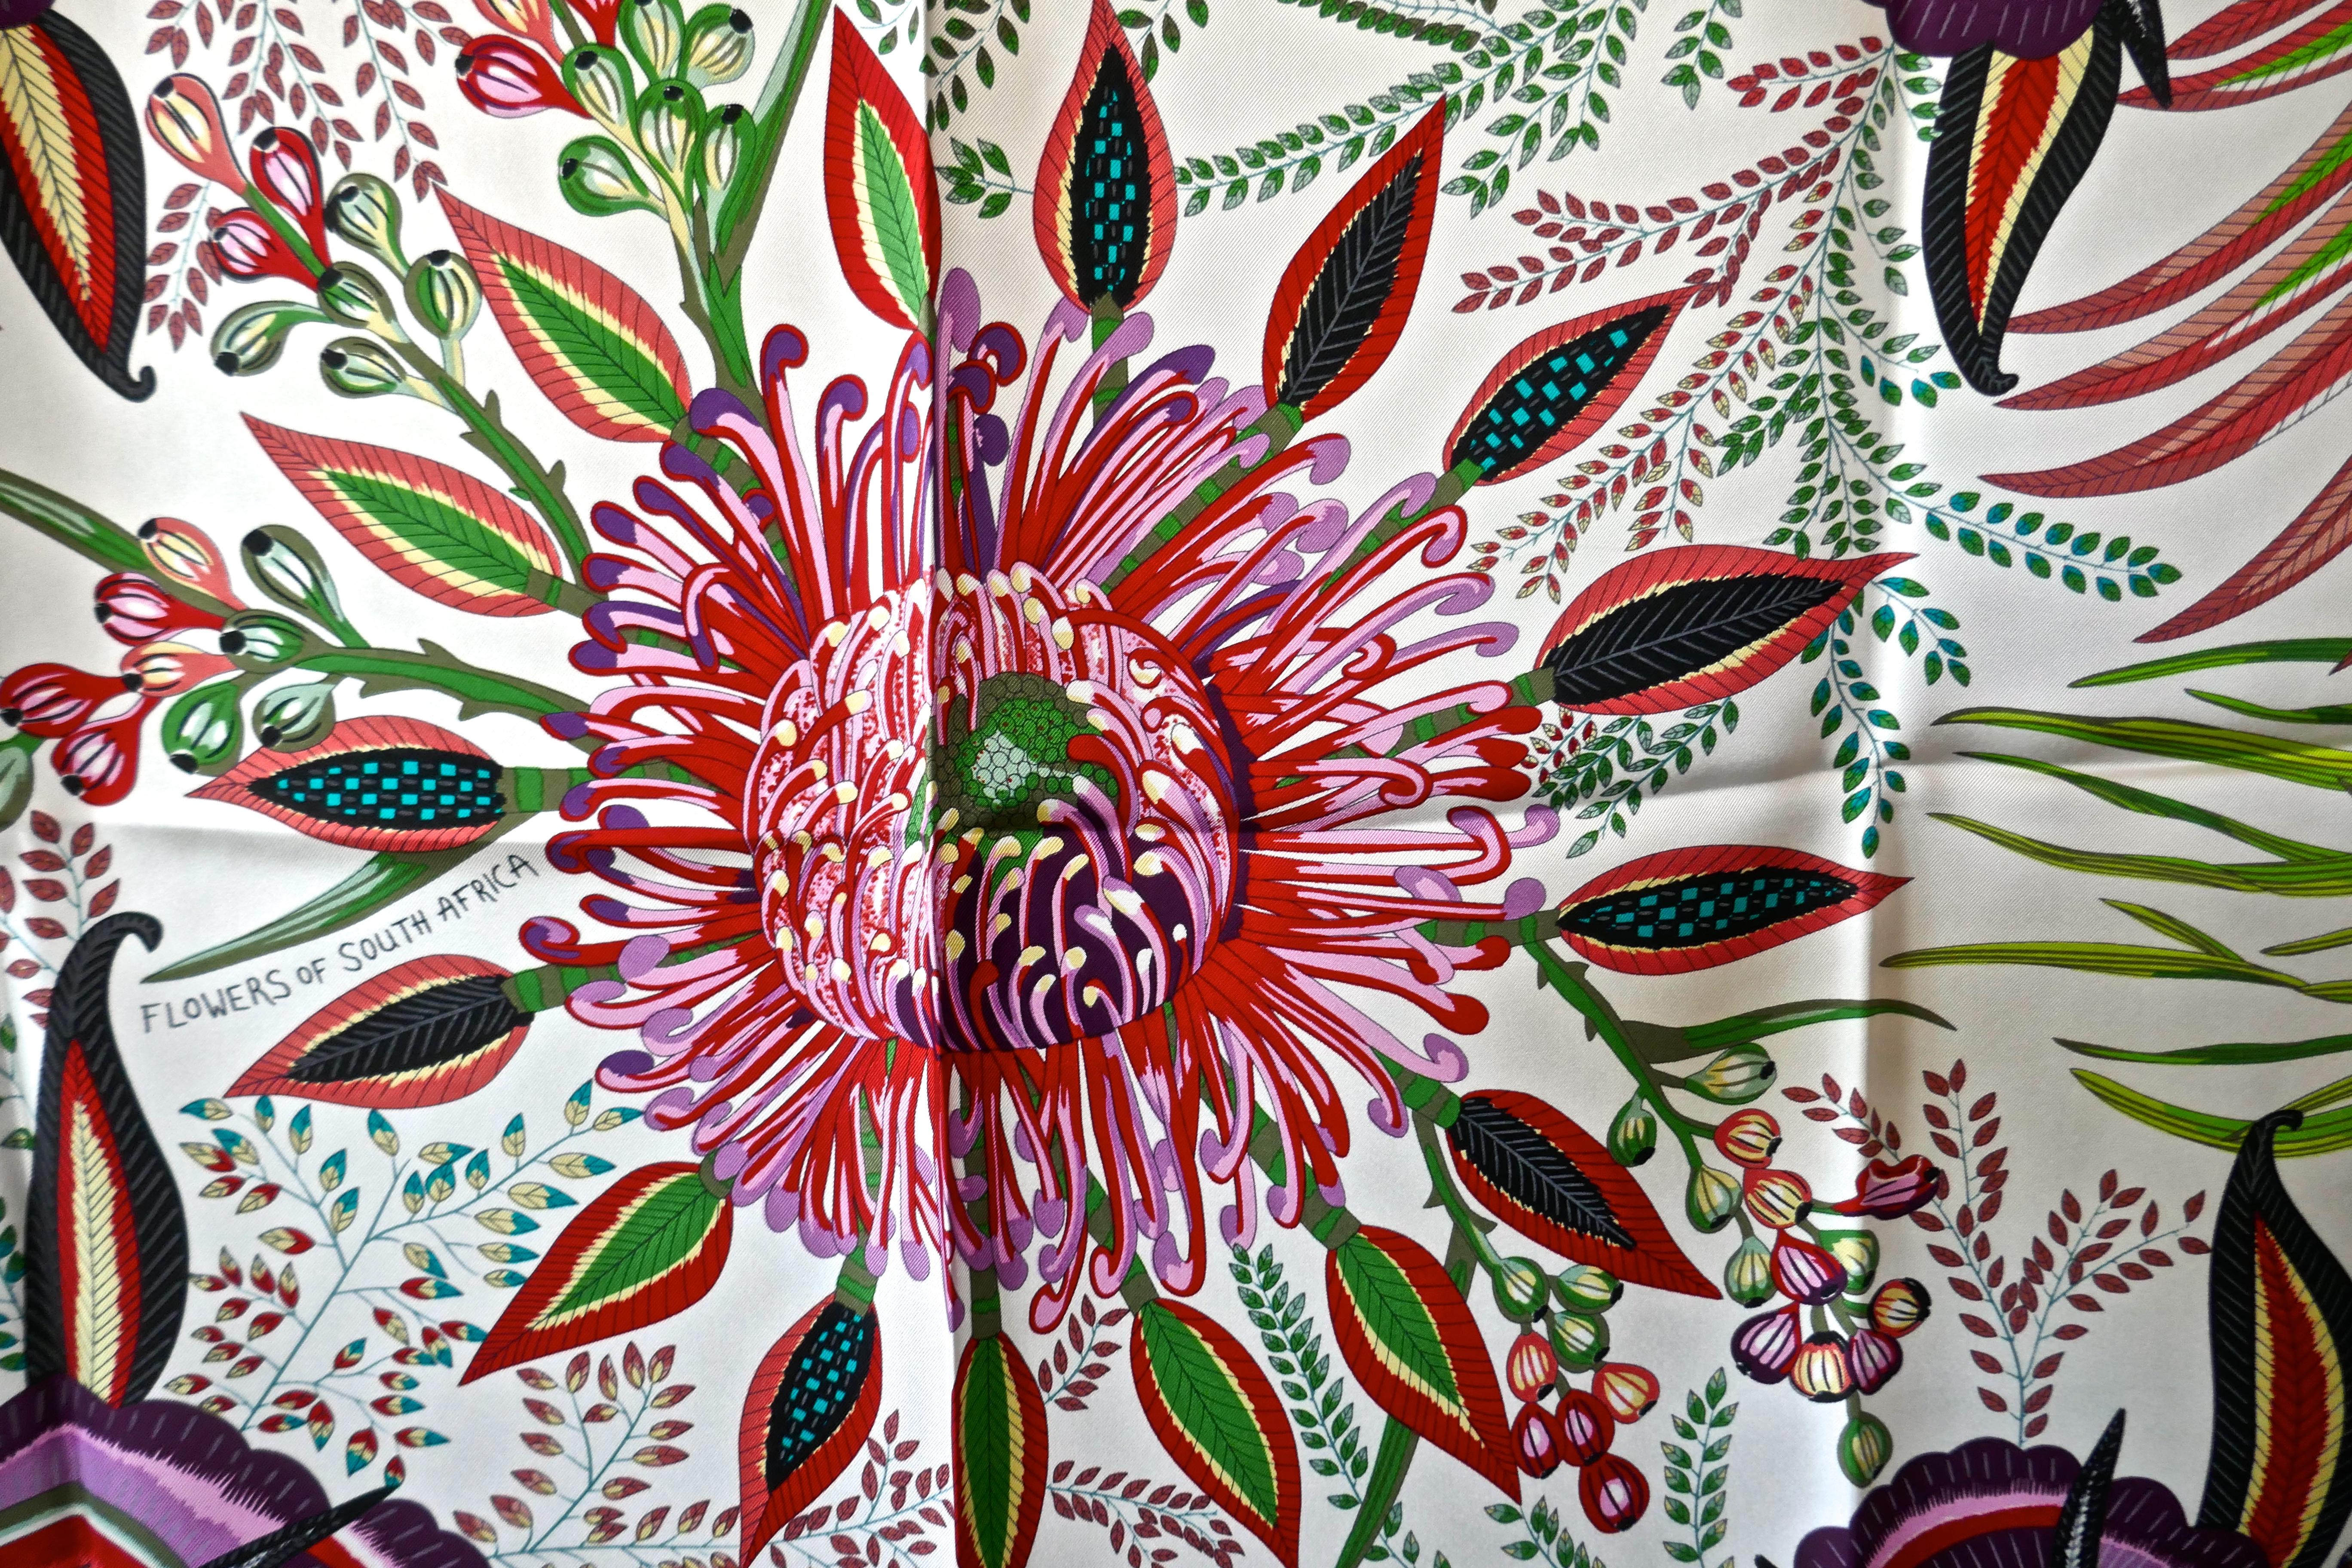 HERMÈS Ardmore Artists design “Flowers of South Africa” 100% Silk Scarf, 2016

 Authenticity Guaranteed made in France by Hermes and in stunning Vibrant Colour palette, offered here unused with all its tags, plump hand rolled edges the Hermes